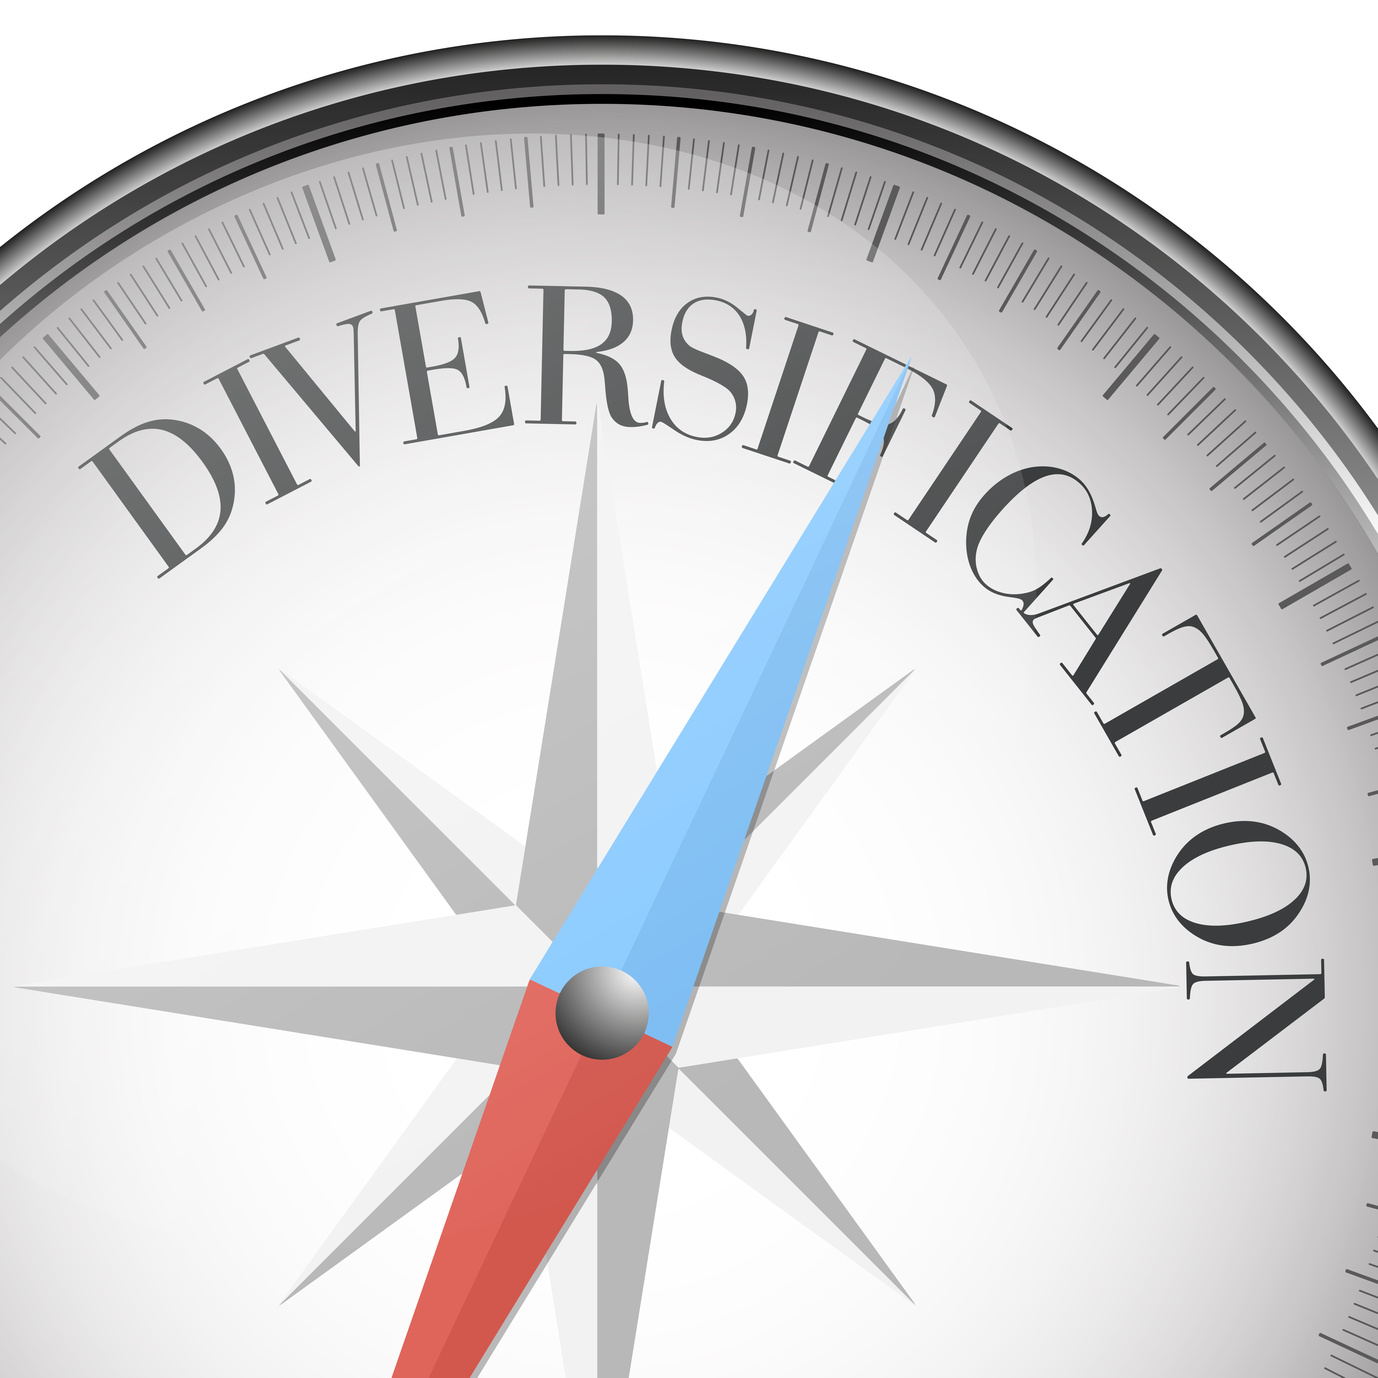 diversification strategy and top management team fit